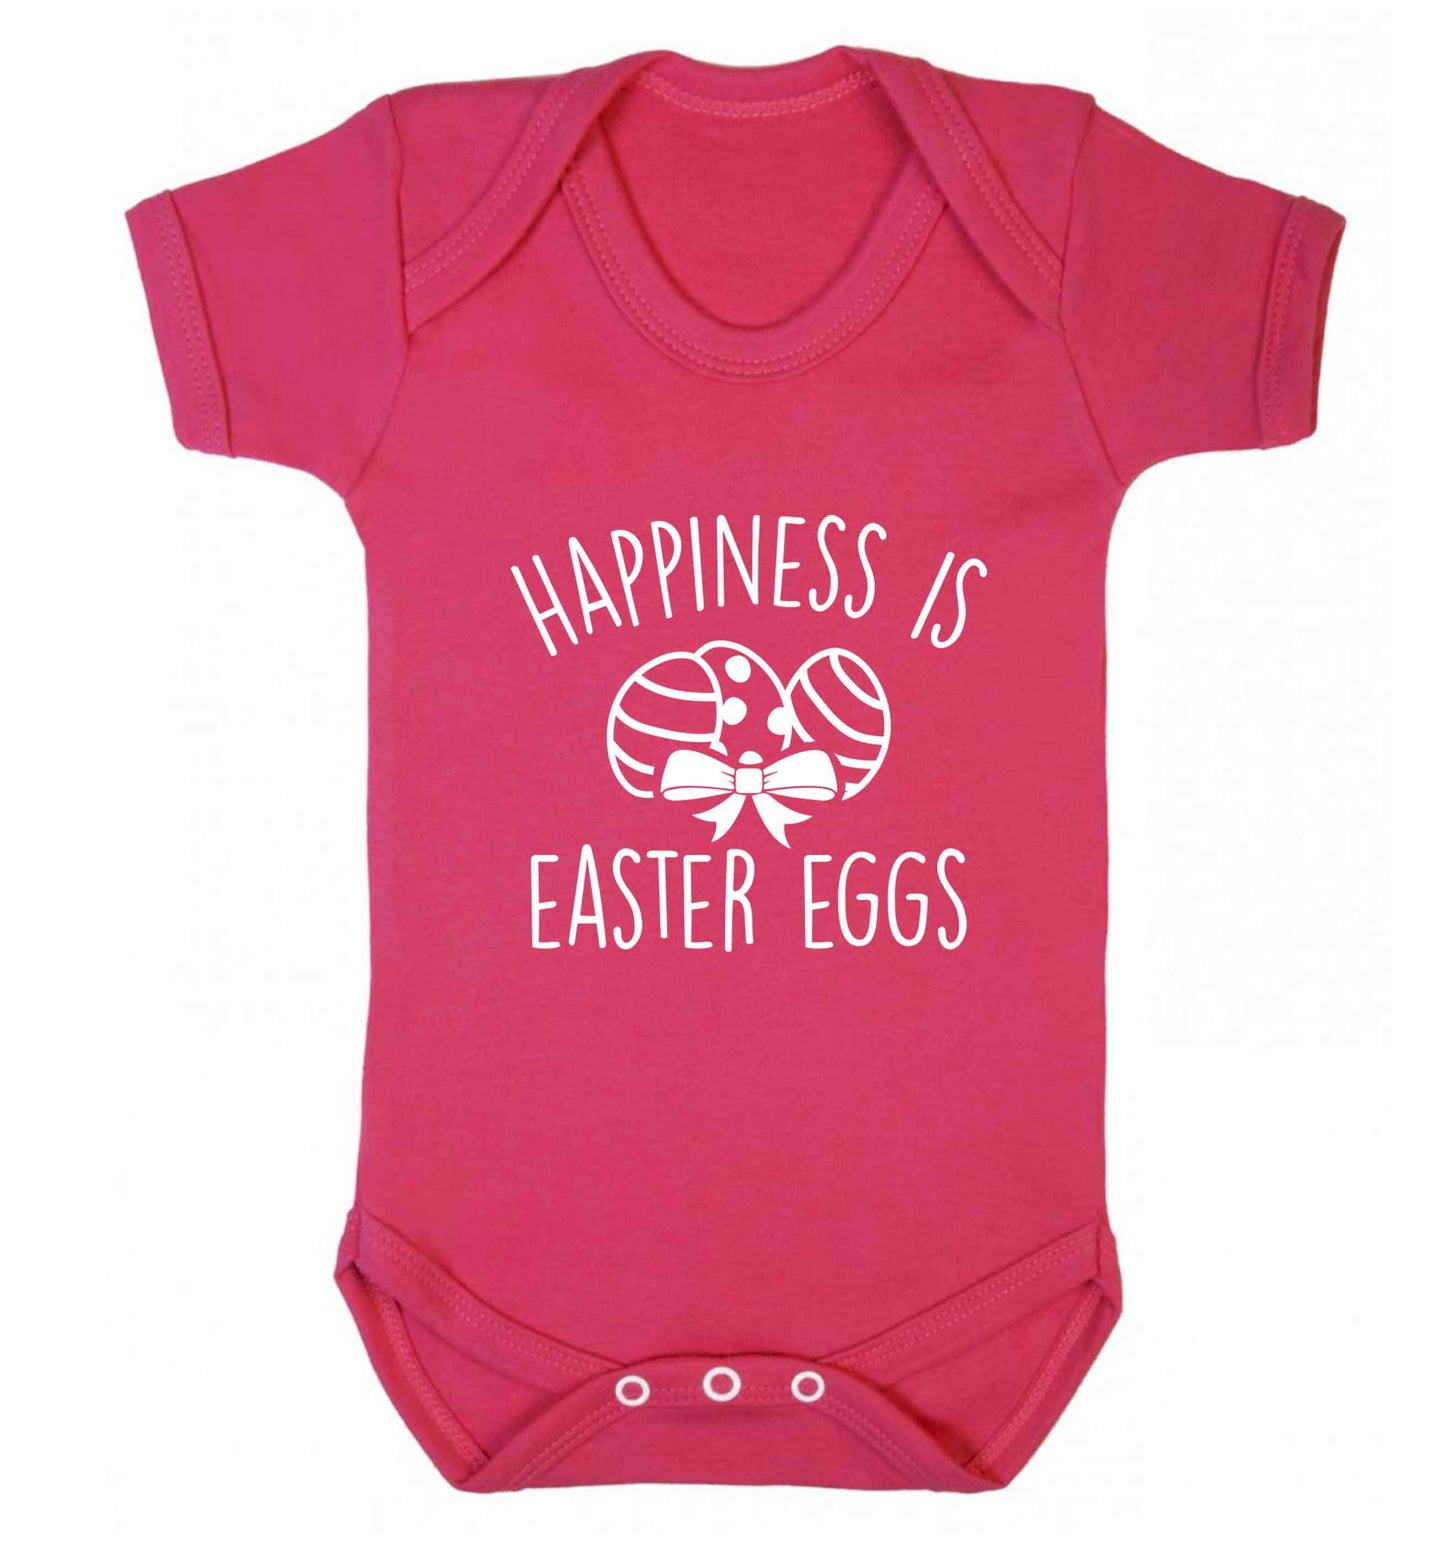 Happiness is Easter eggs baby vest dark pink 18-24 months